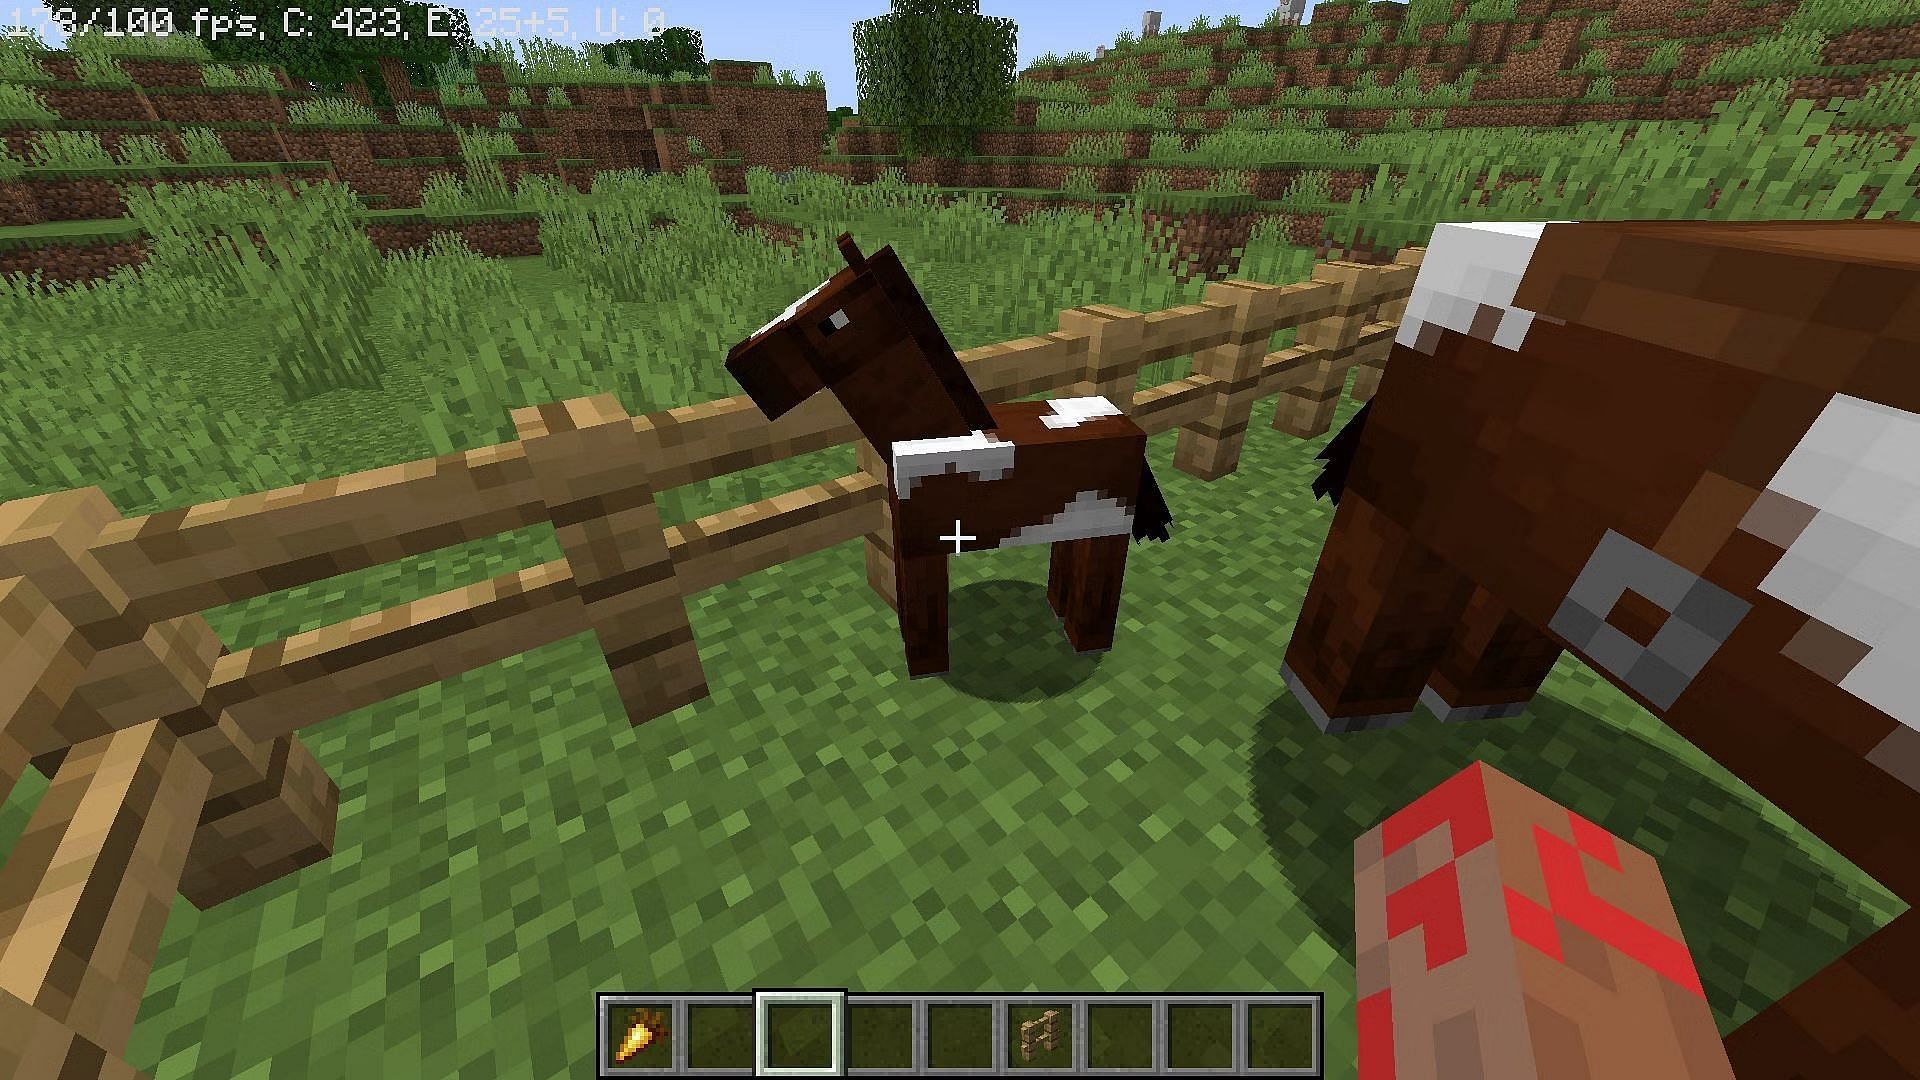 Fowl can have better traits, which can grow and breed again to get even better stats in Minecraft (Image via Mojang)